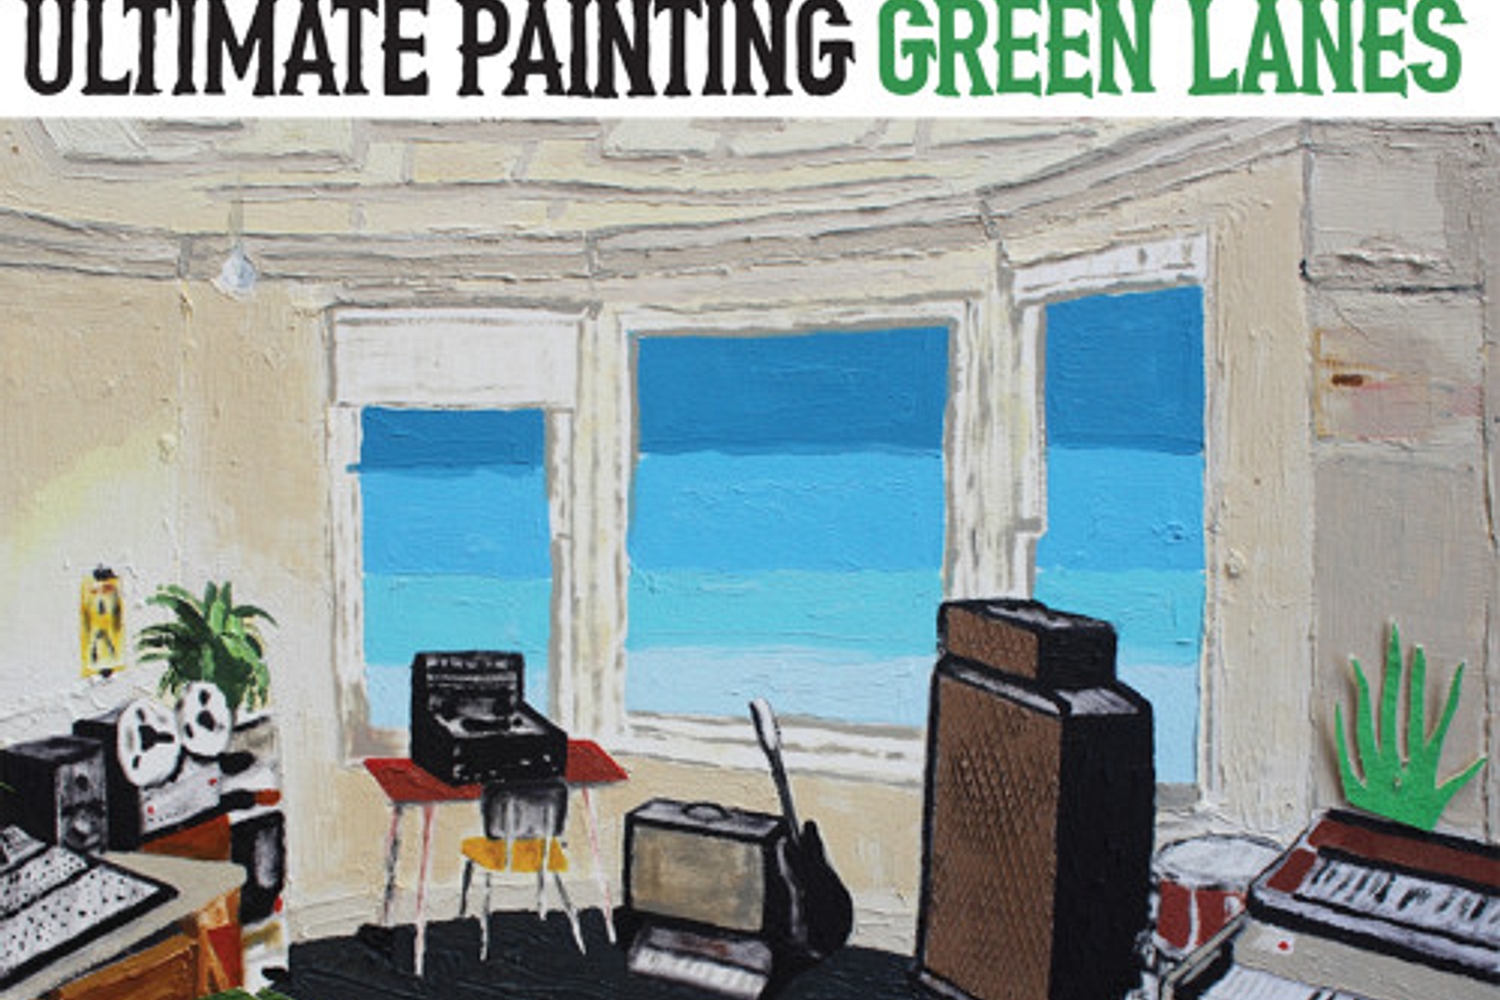 Ultimate Painting - Green Lanes